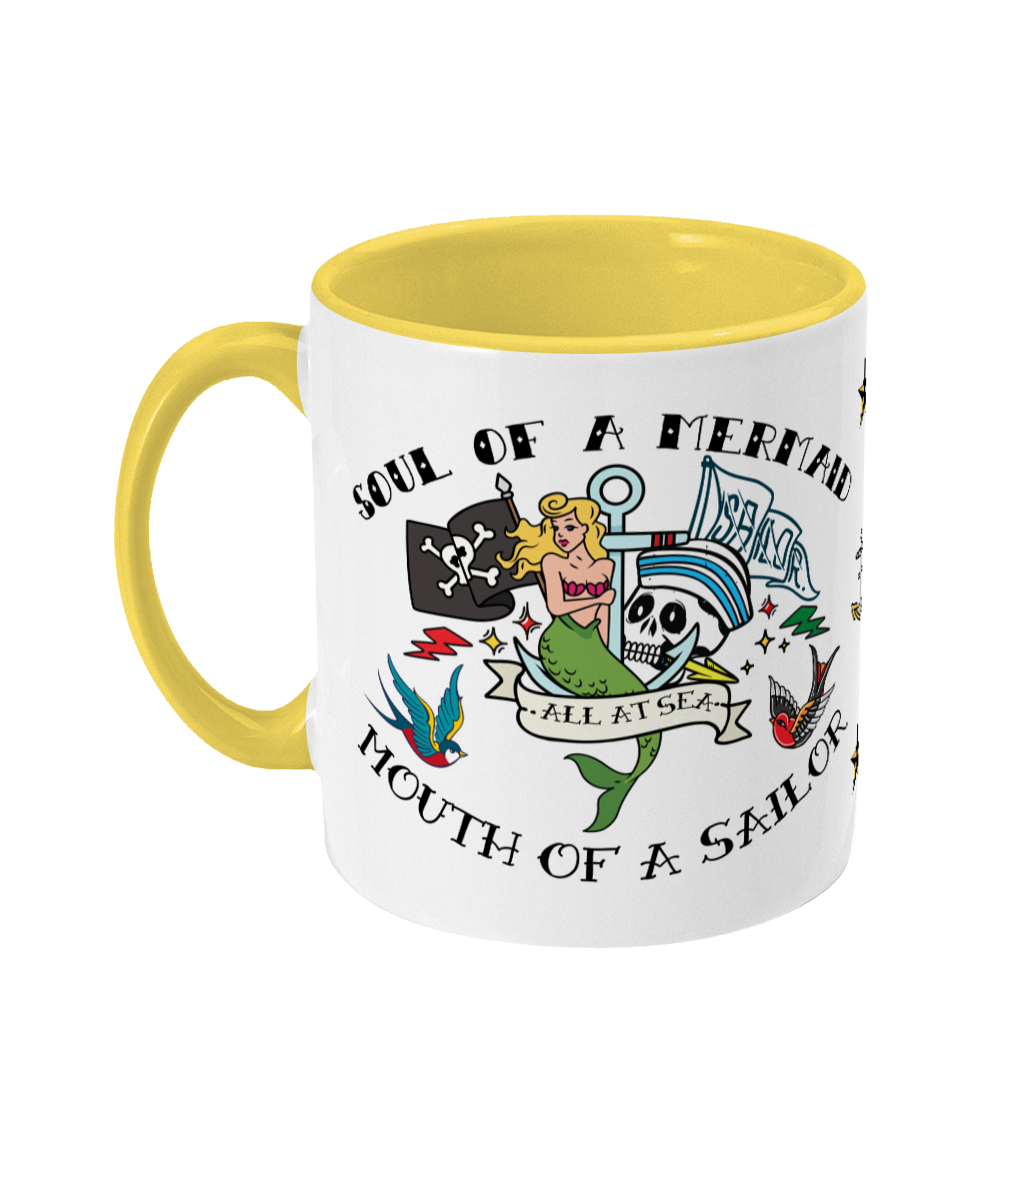 Sailor tattoo mug, Soul of a mermaid, mouth of a sailor Great Harbour Gifts